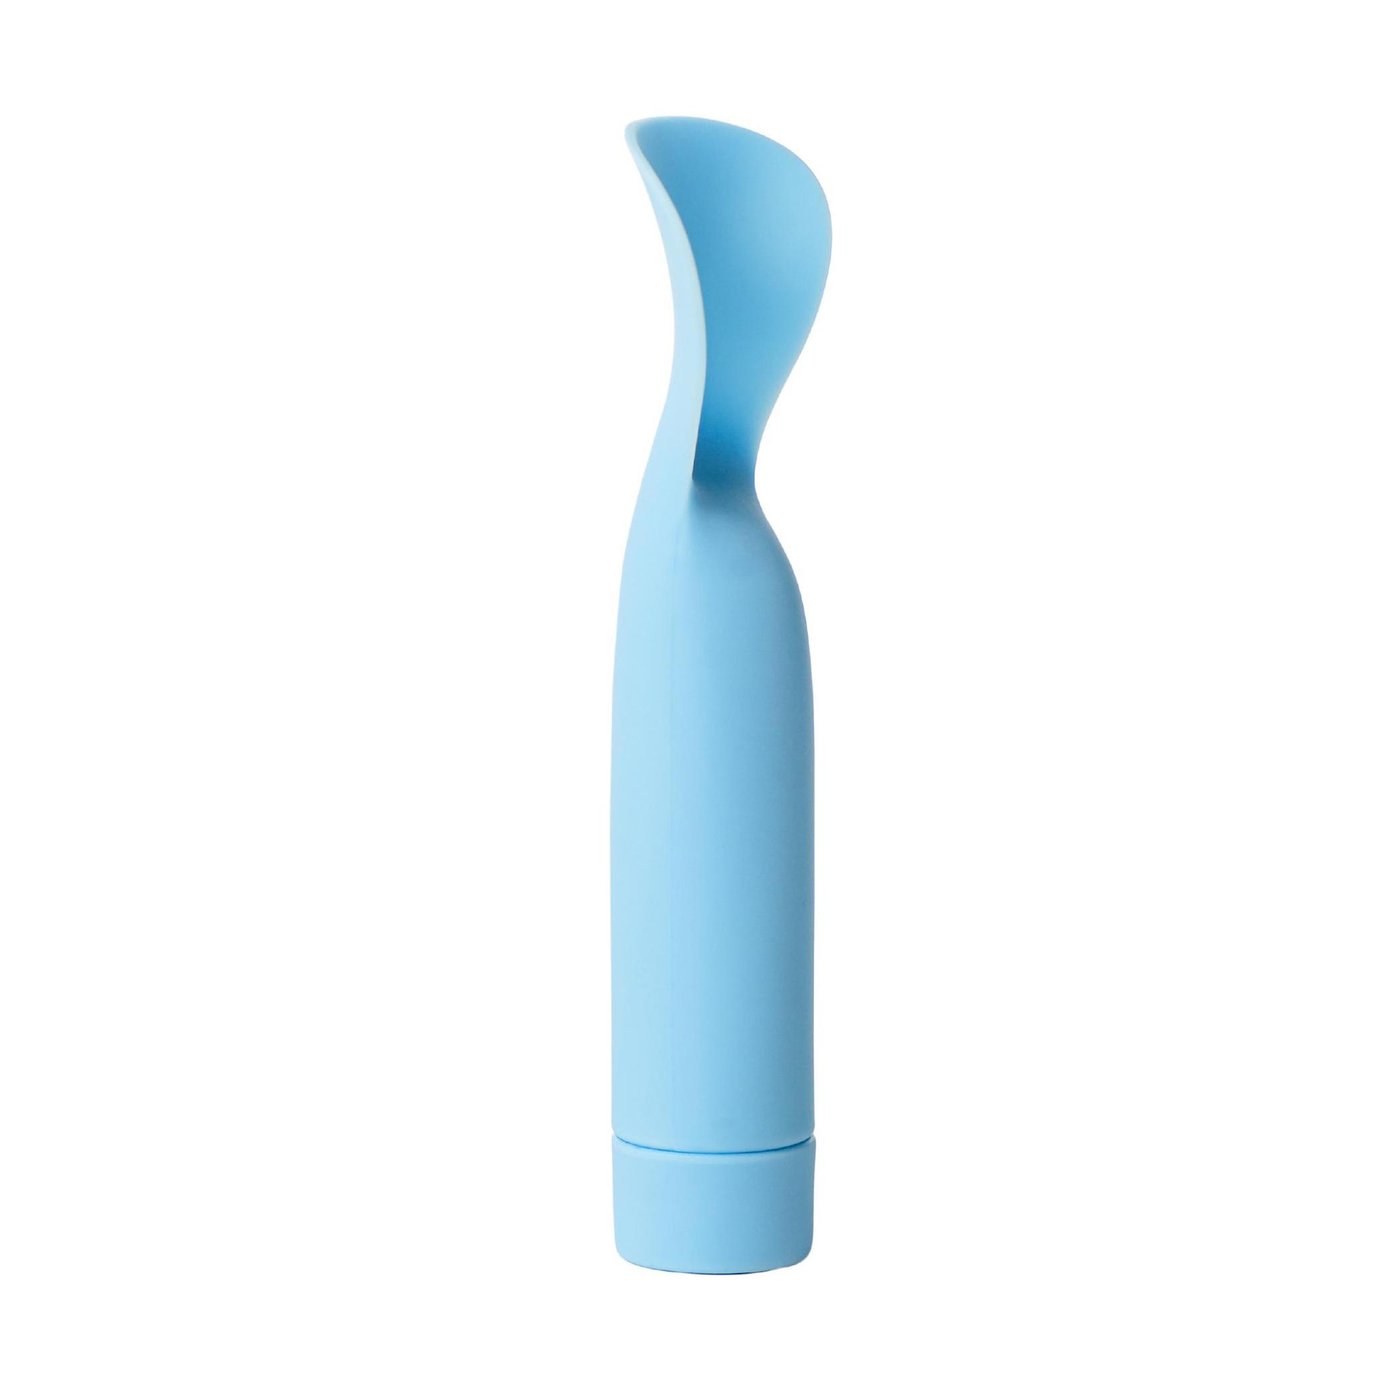 Smile Makers The French Lover Vibrator | goop